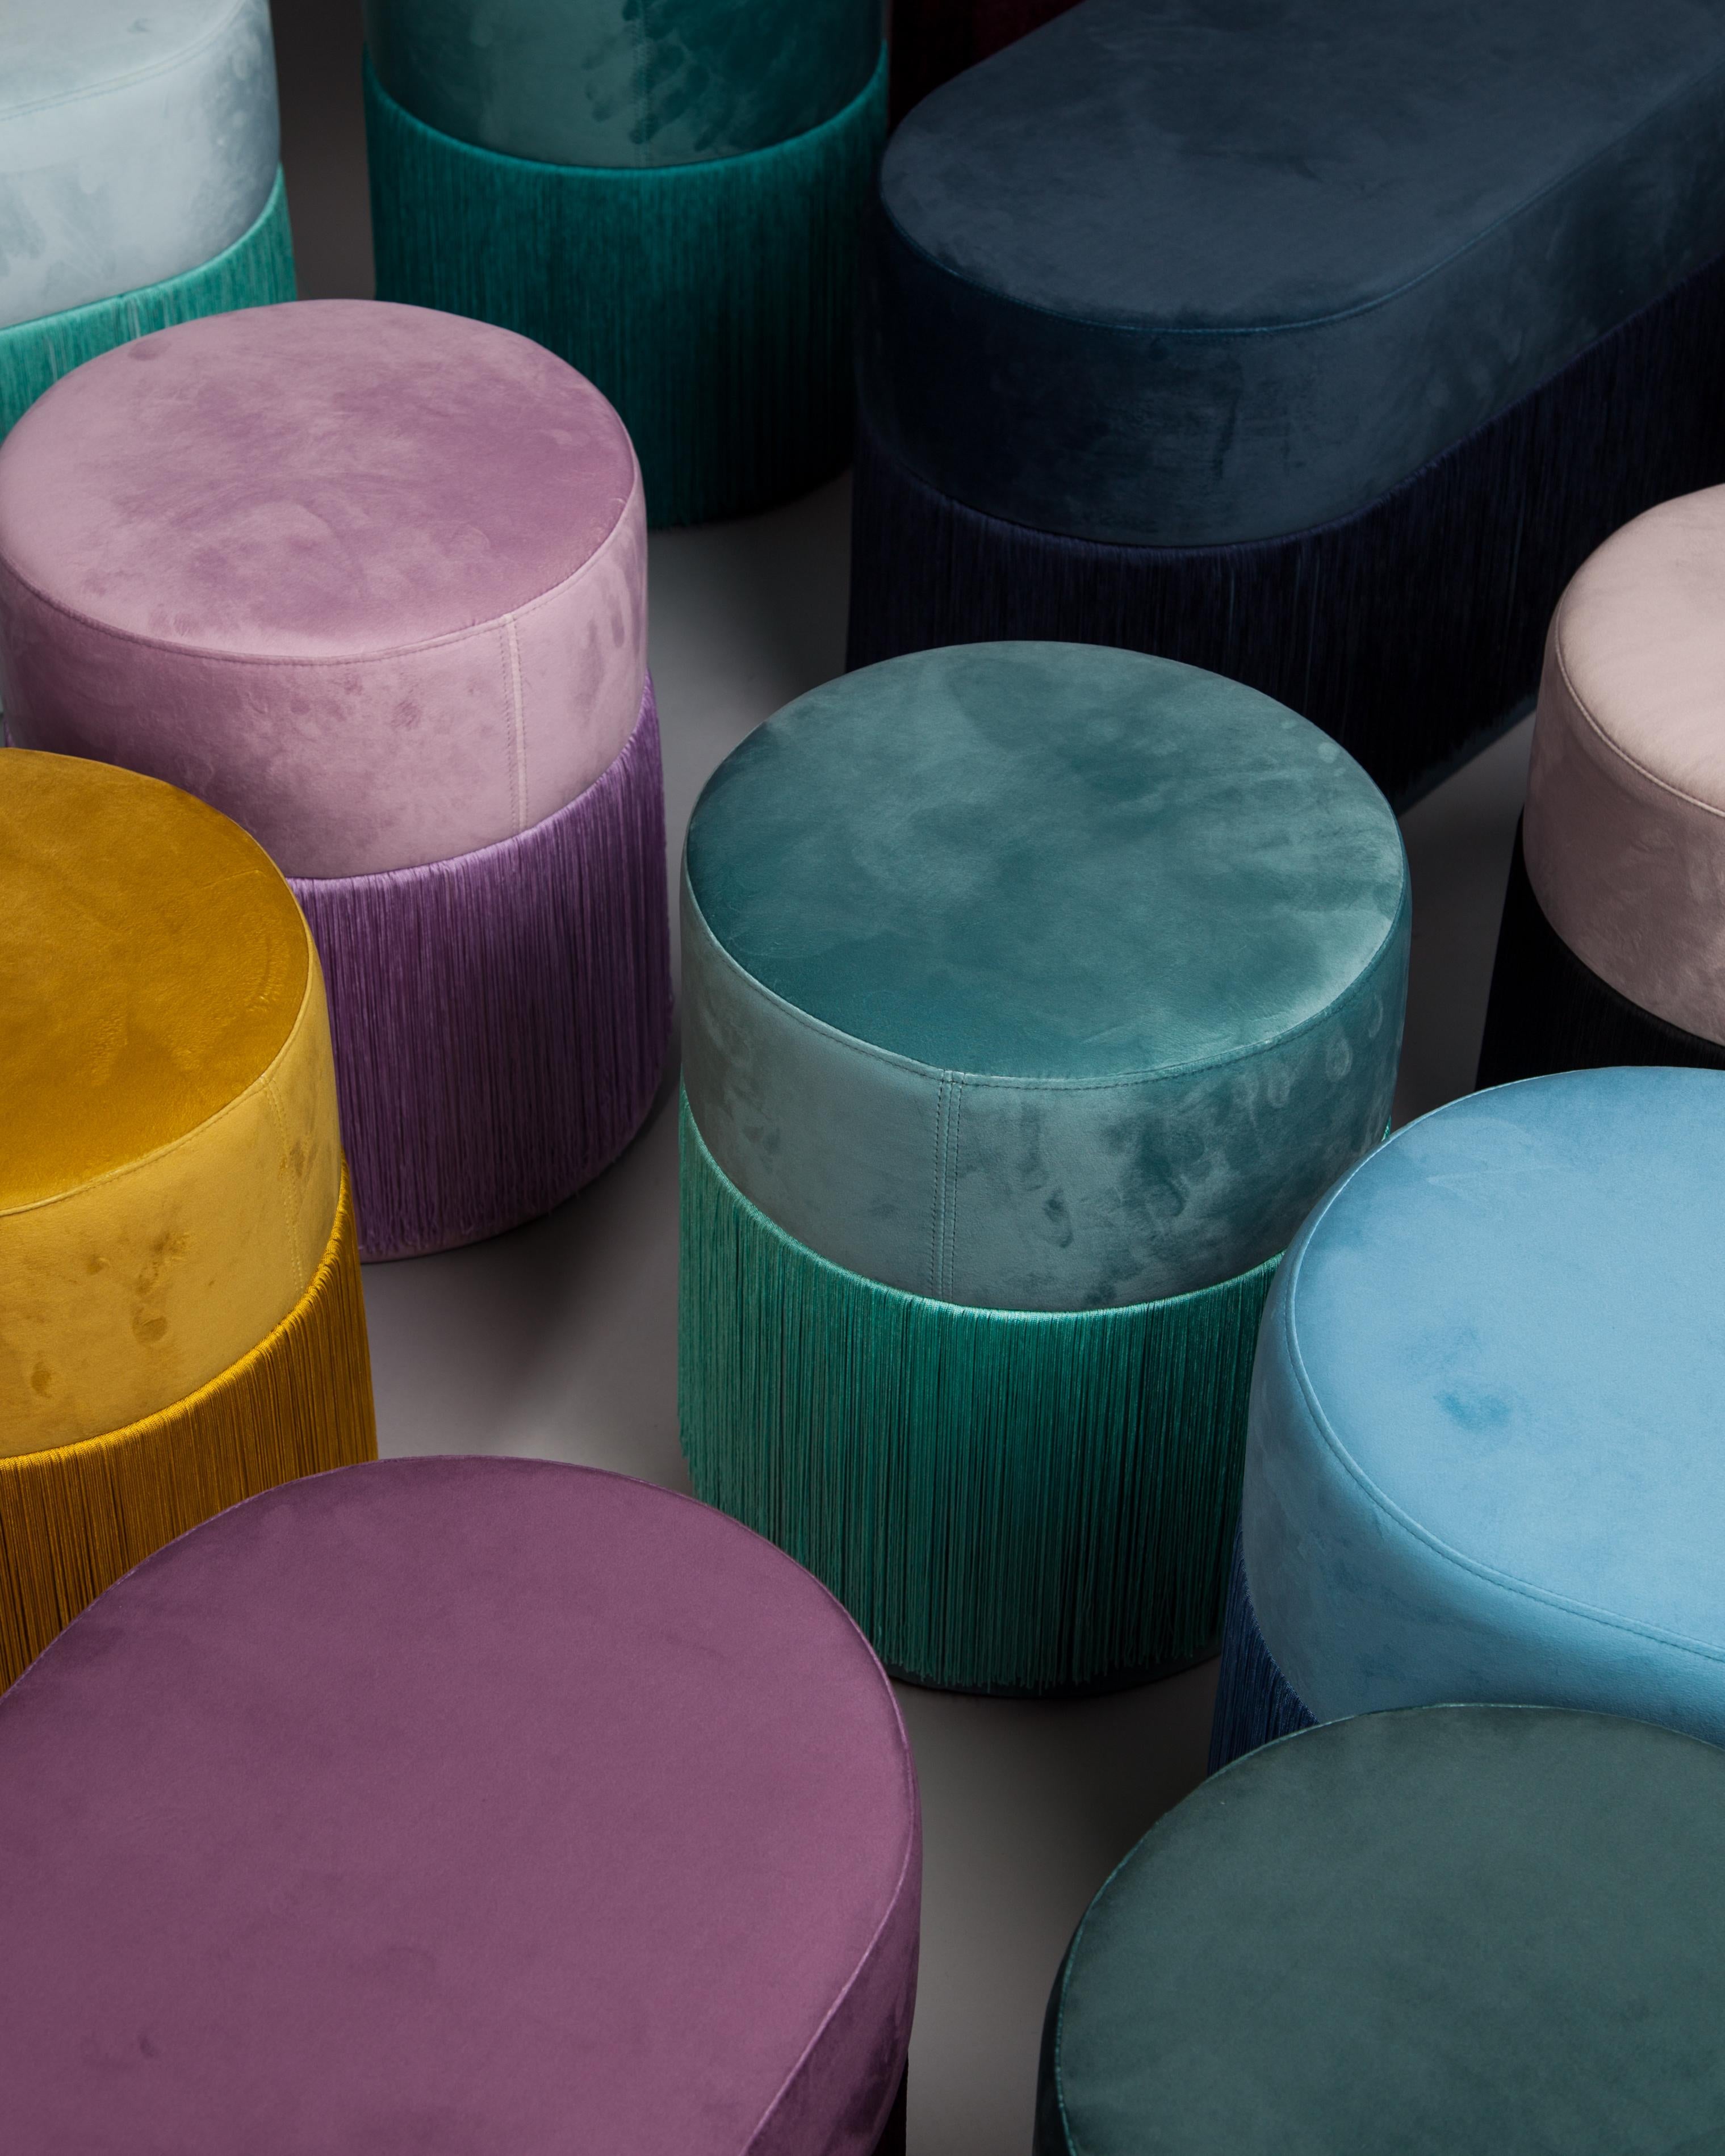 Pouf Pill S by Houtique 12